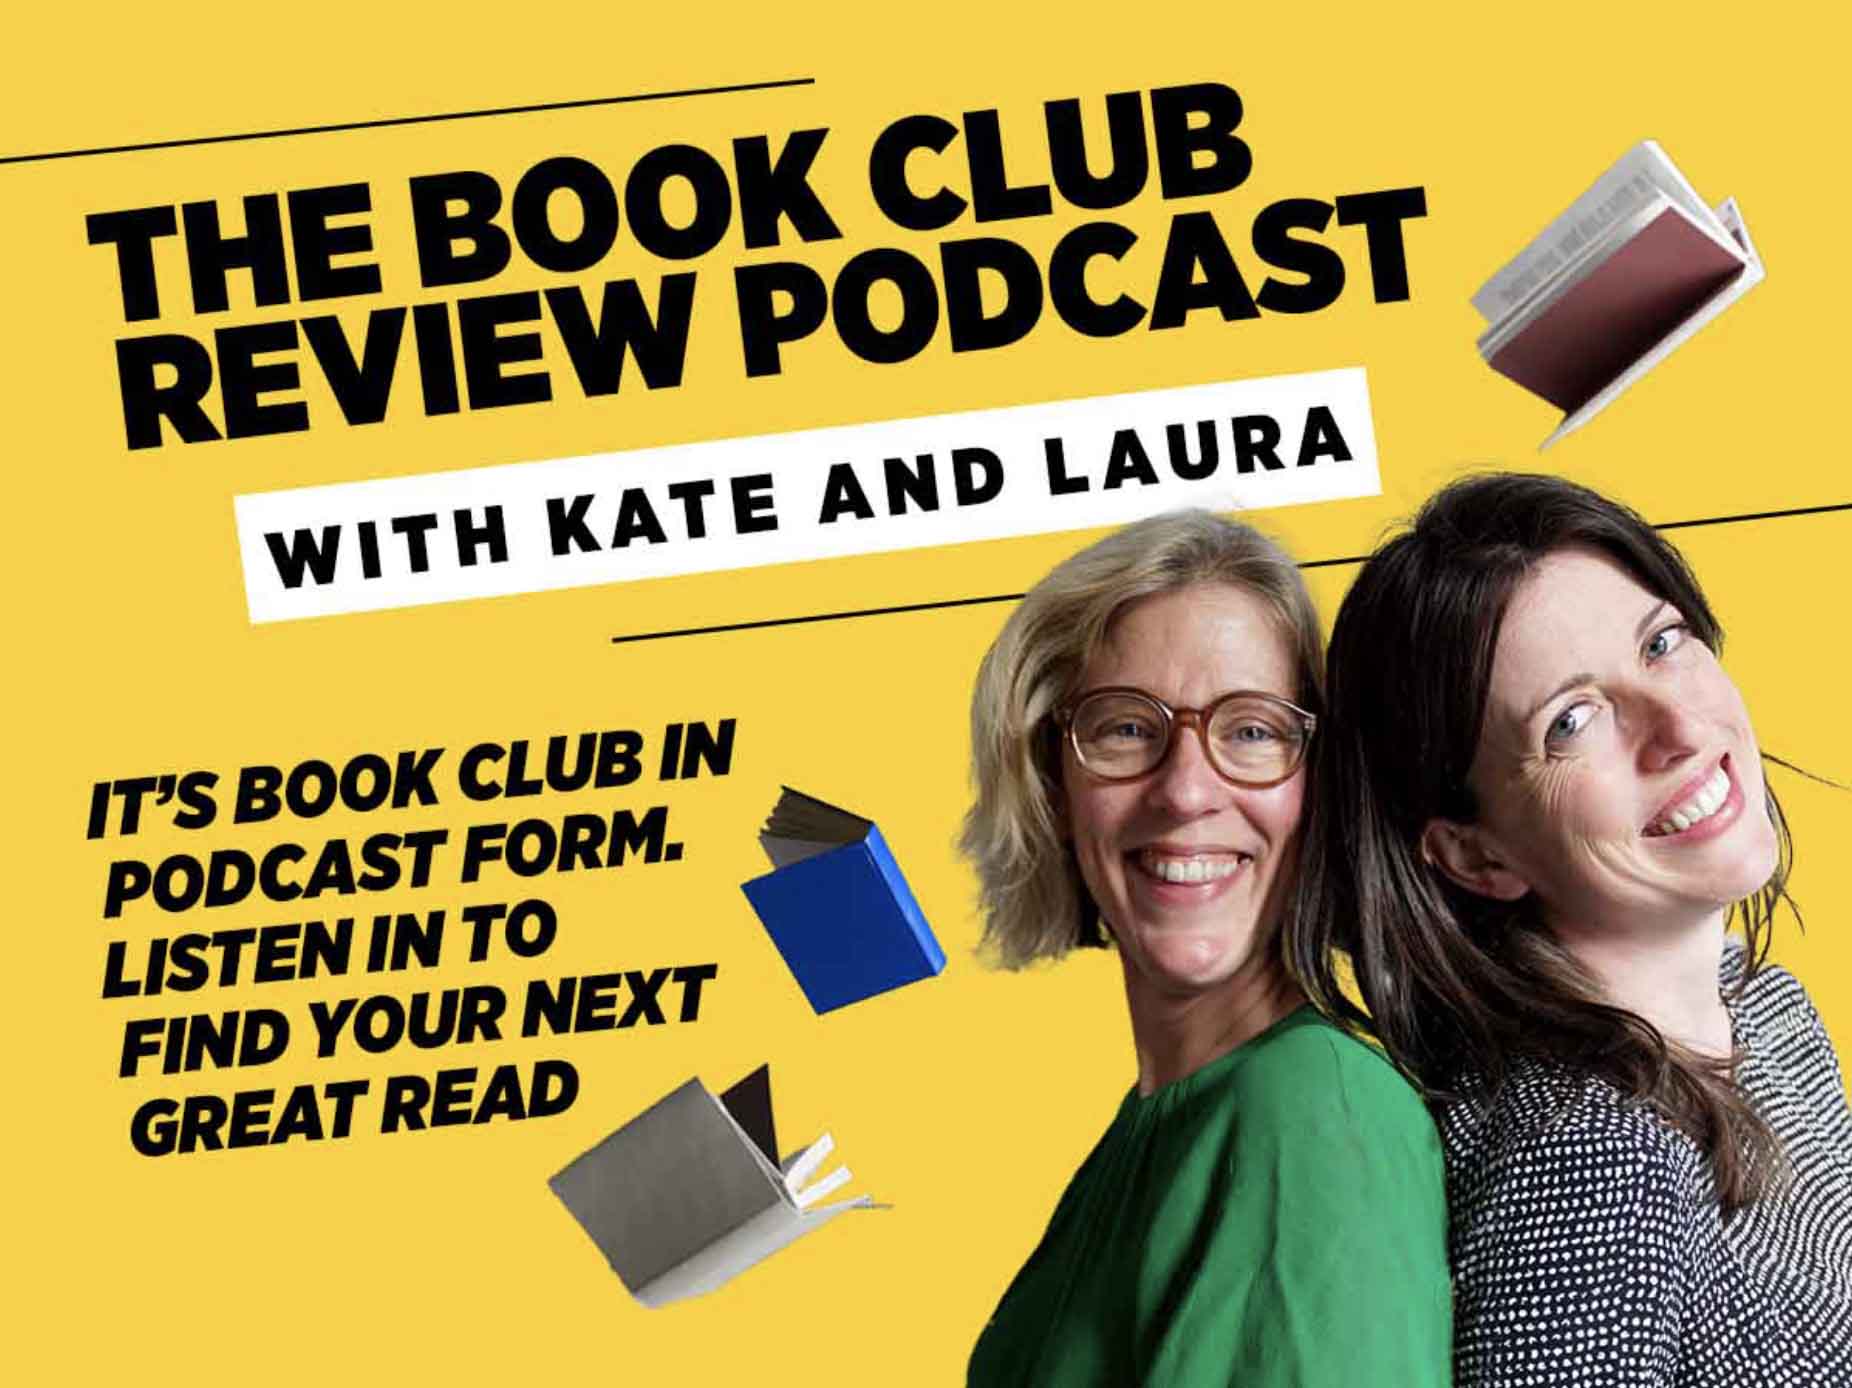 Books podcast: The Book Club Review podcast, a podcast about books and book clubs